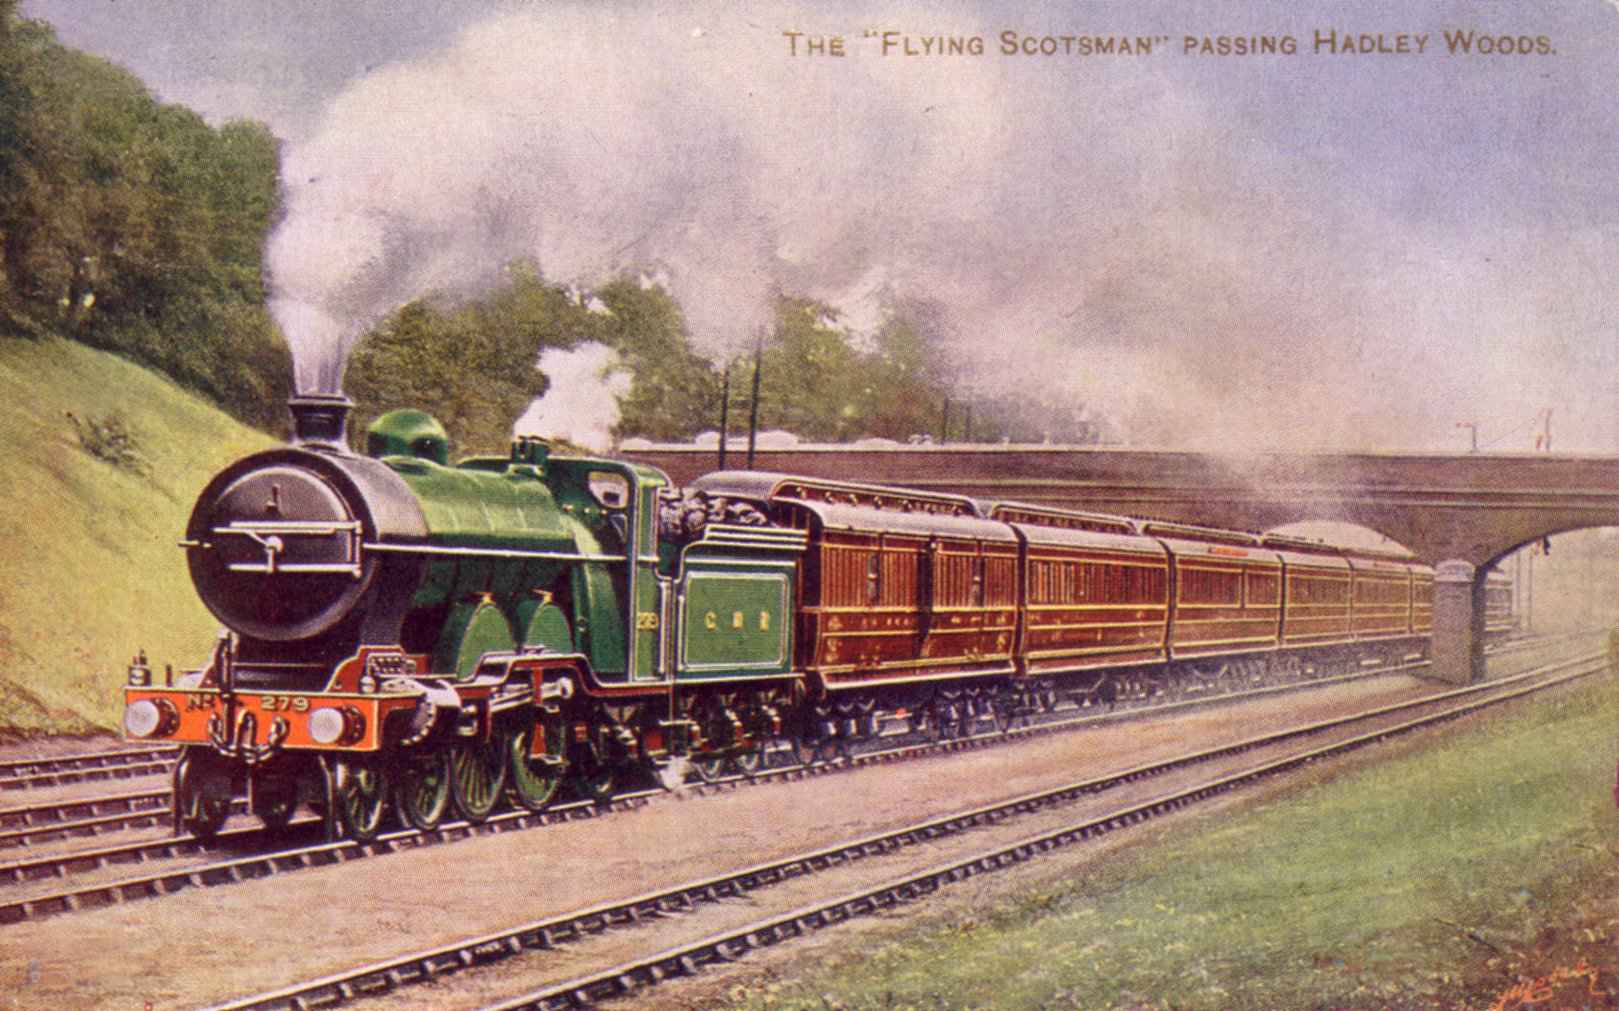 The 'Flying Scotsman' passing Hadley Woods